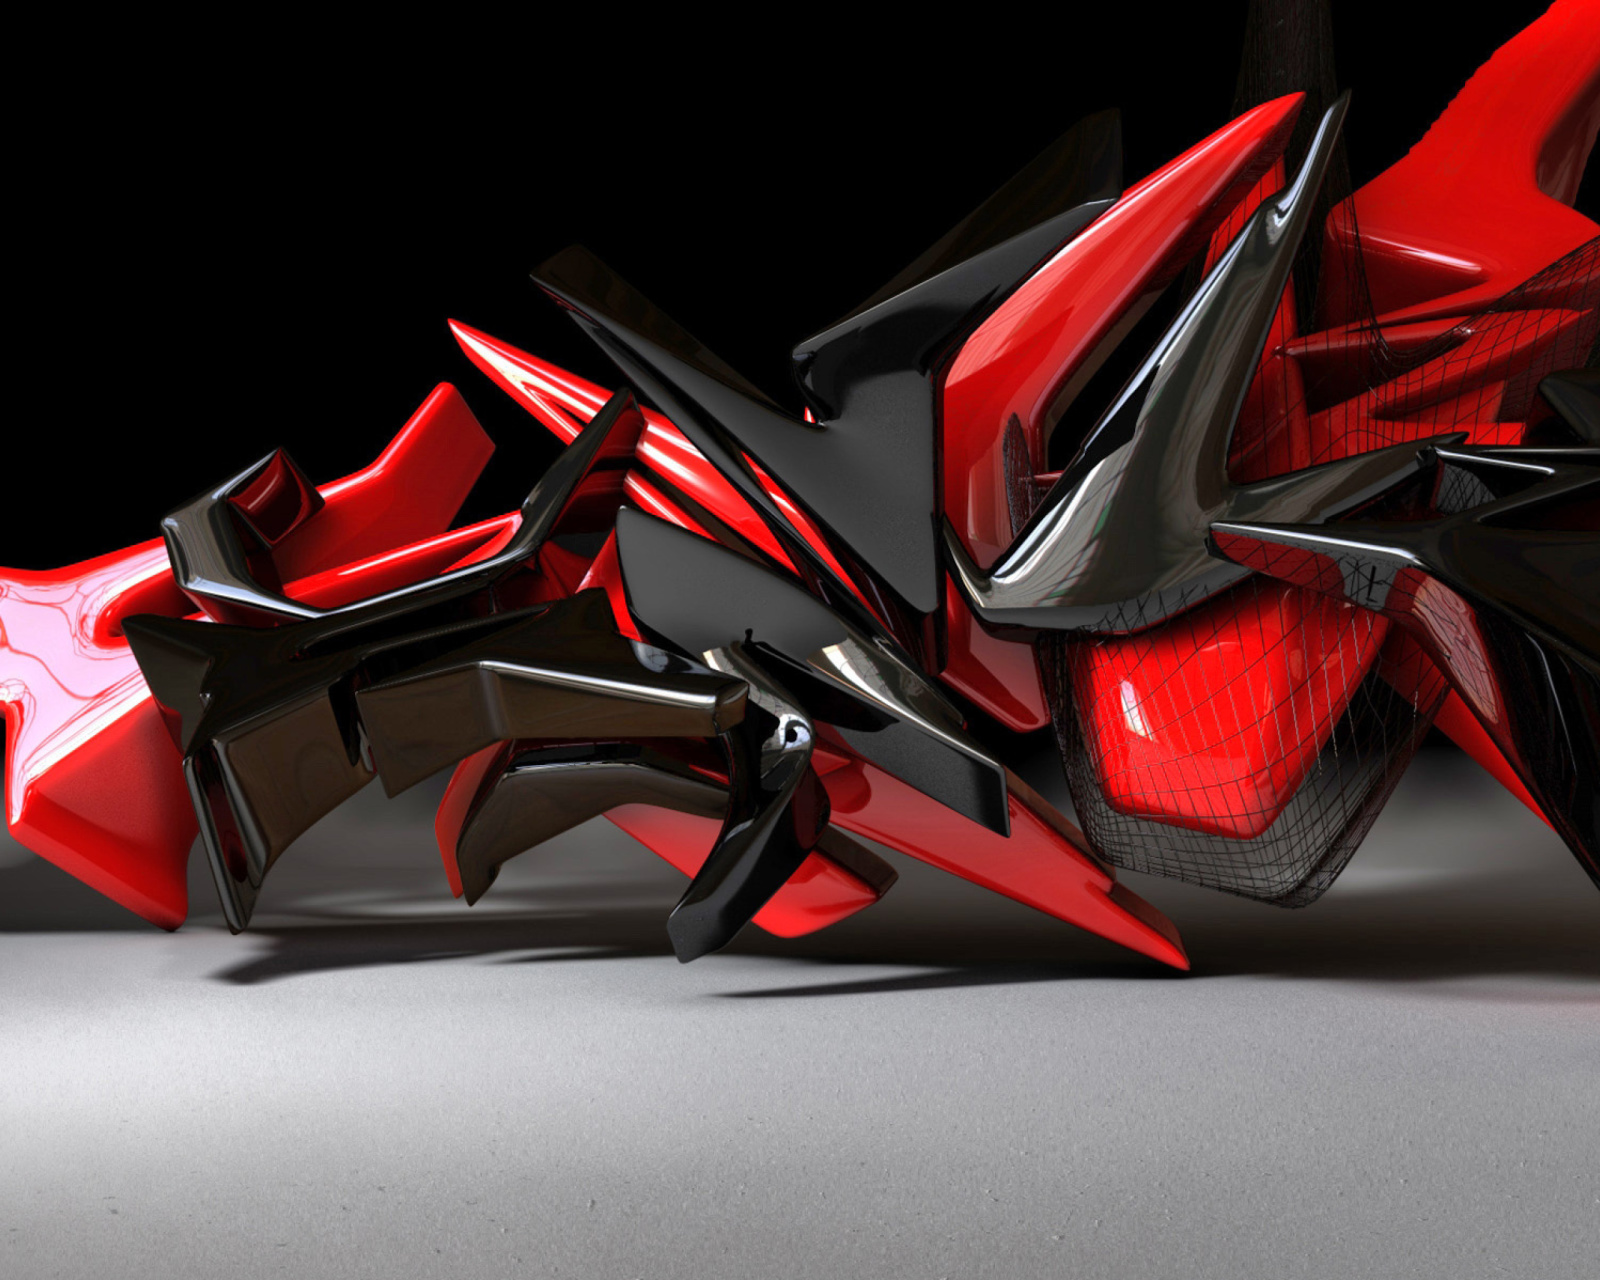 Black And Red 3d Design wallpaper 1600x1280